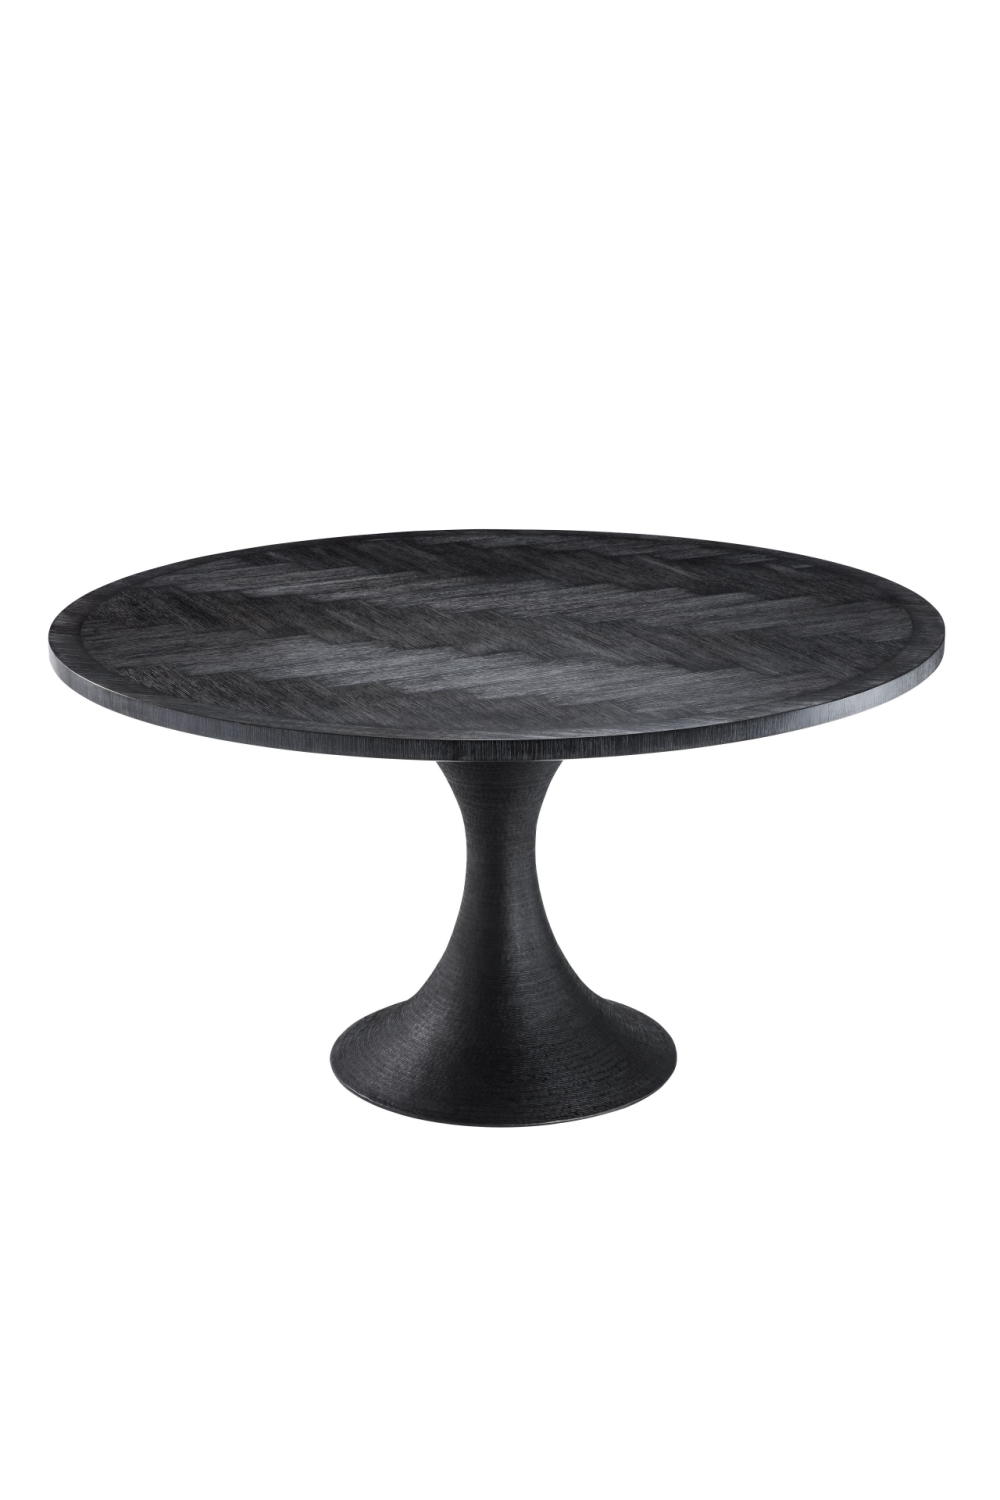 Round Charcoal Dining Table | Eichholtz Melchior | Woodfurniture.com